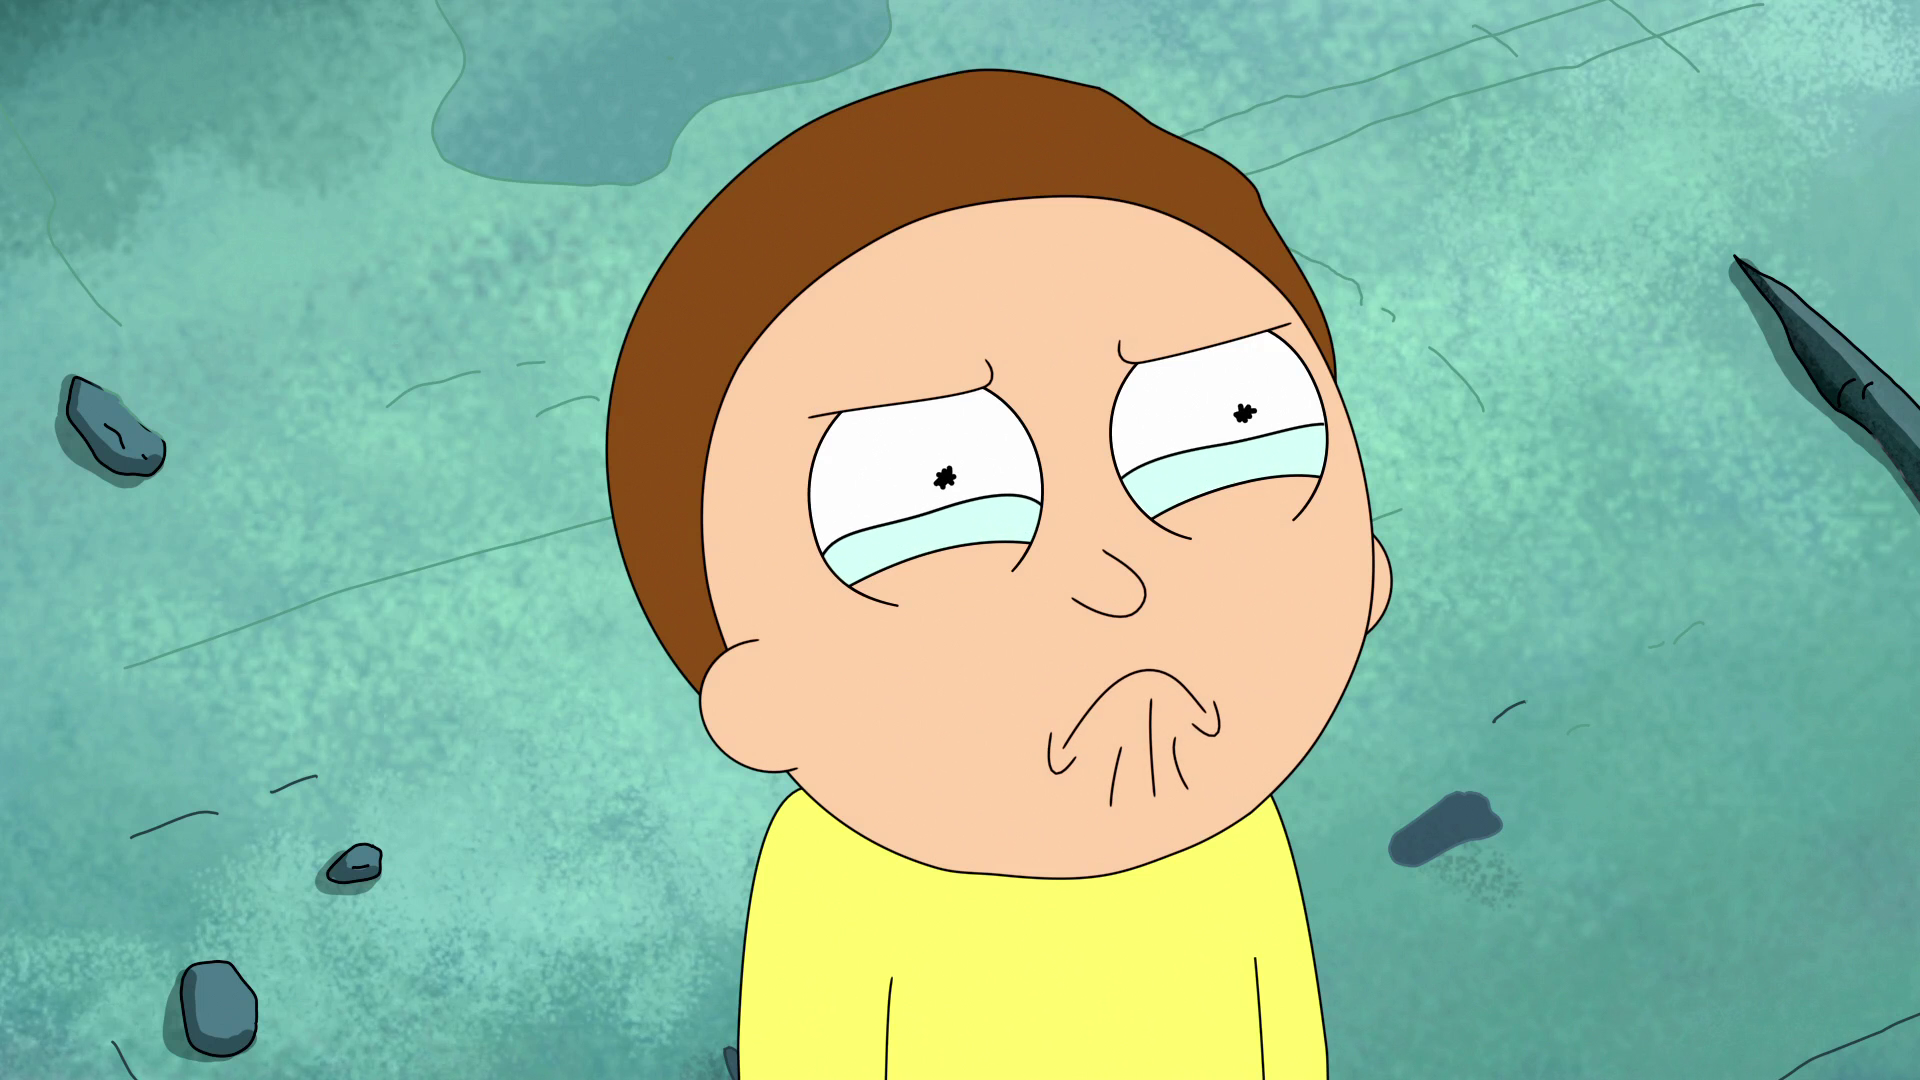 morty-smith.png